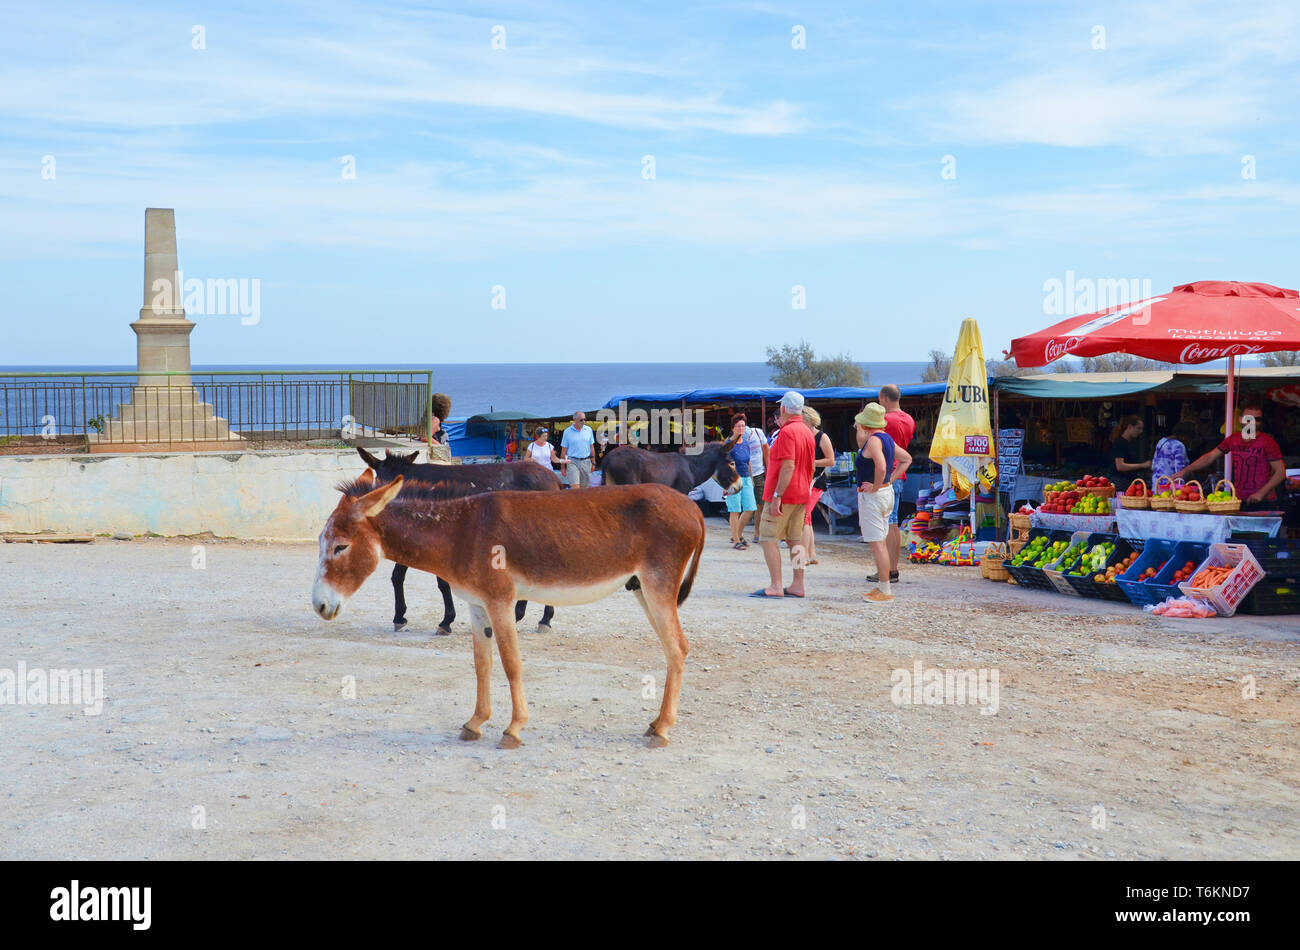 Dipkarpaz, Turkish Northern Cyprus - Oct 3rd 2018: Wild donkeys standing on the sandy street. Fruit market stands and tourists walking by in the background. The animals are local curiosity. Stock Photo